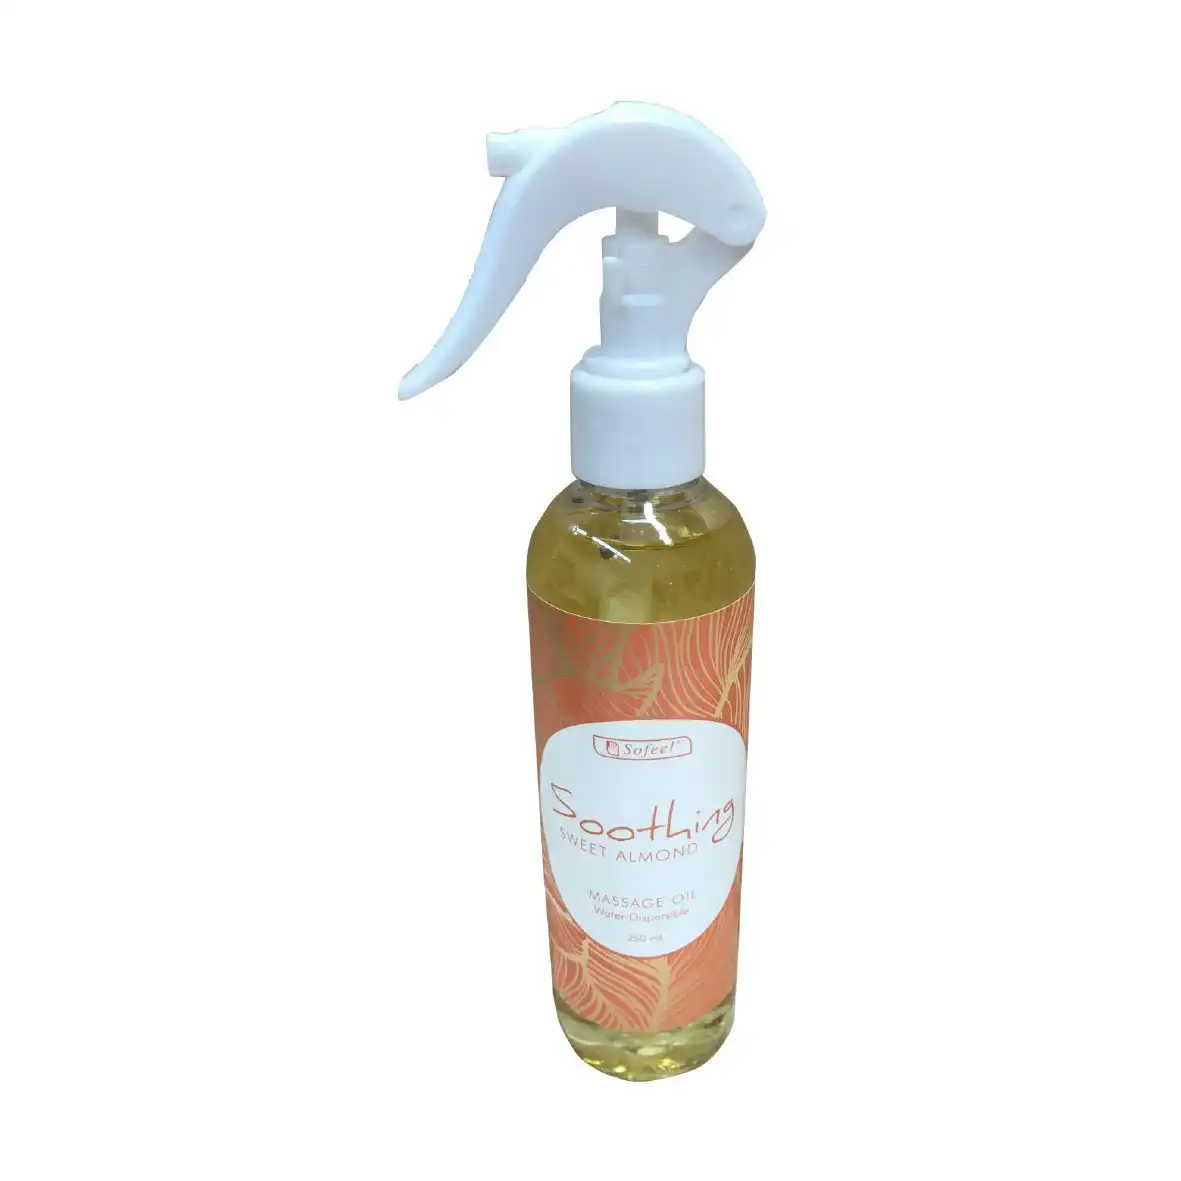 Sofeel Water Dispersible Massage Oils 250ml with Trigger Sprayer Soothing Sweet Almond Scent